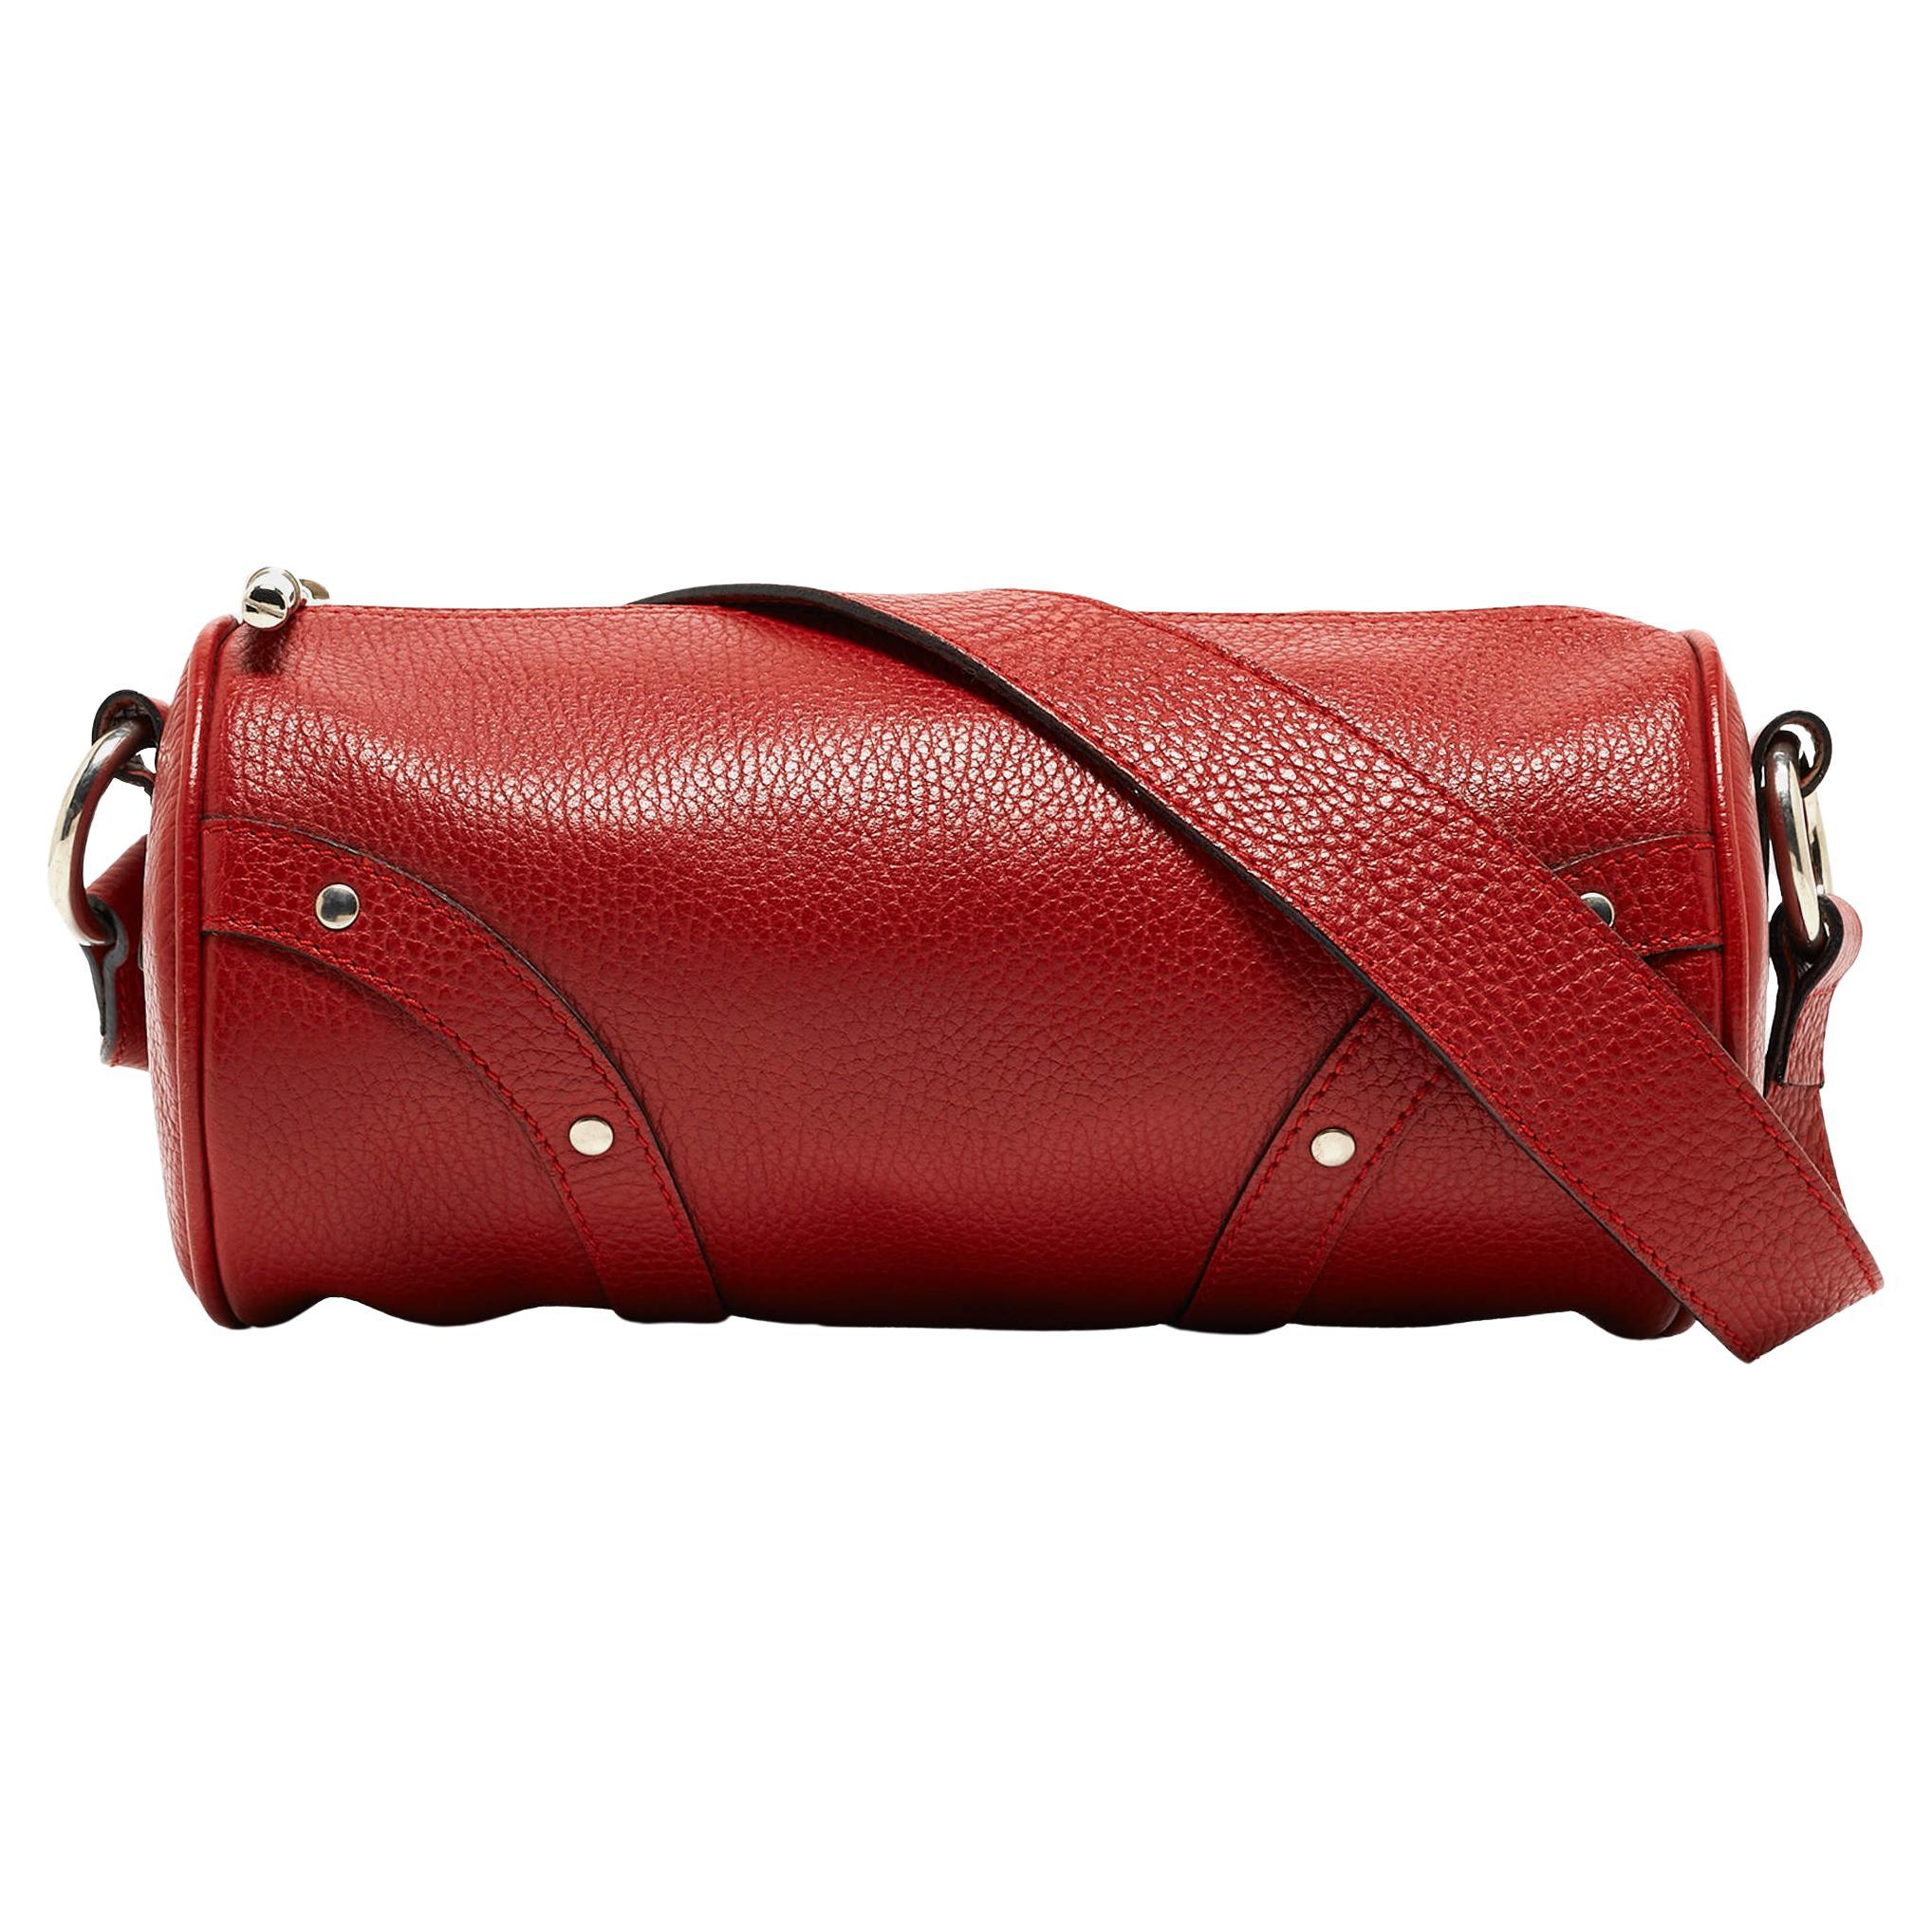 Burberry Red Leather Barrel Bag For Sale